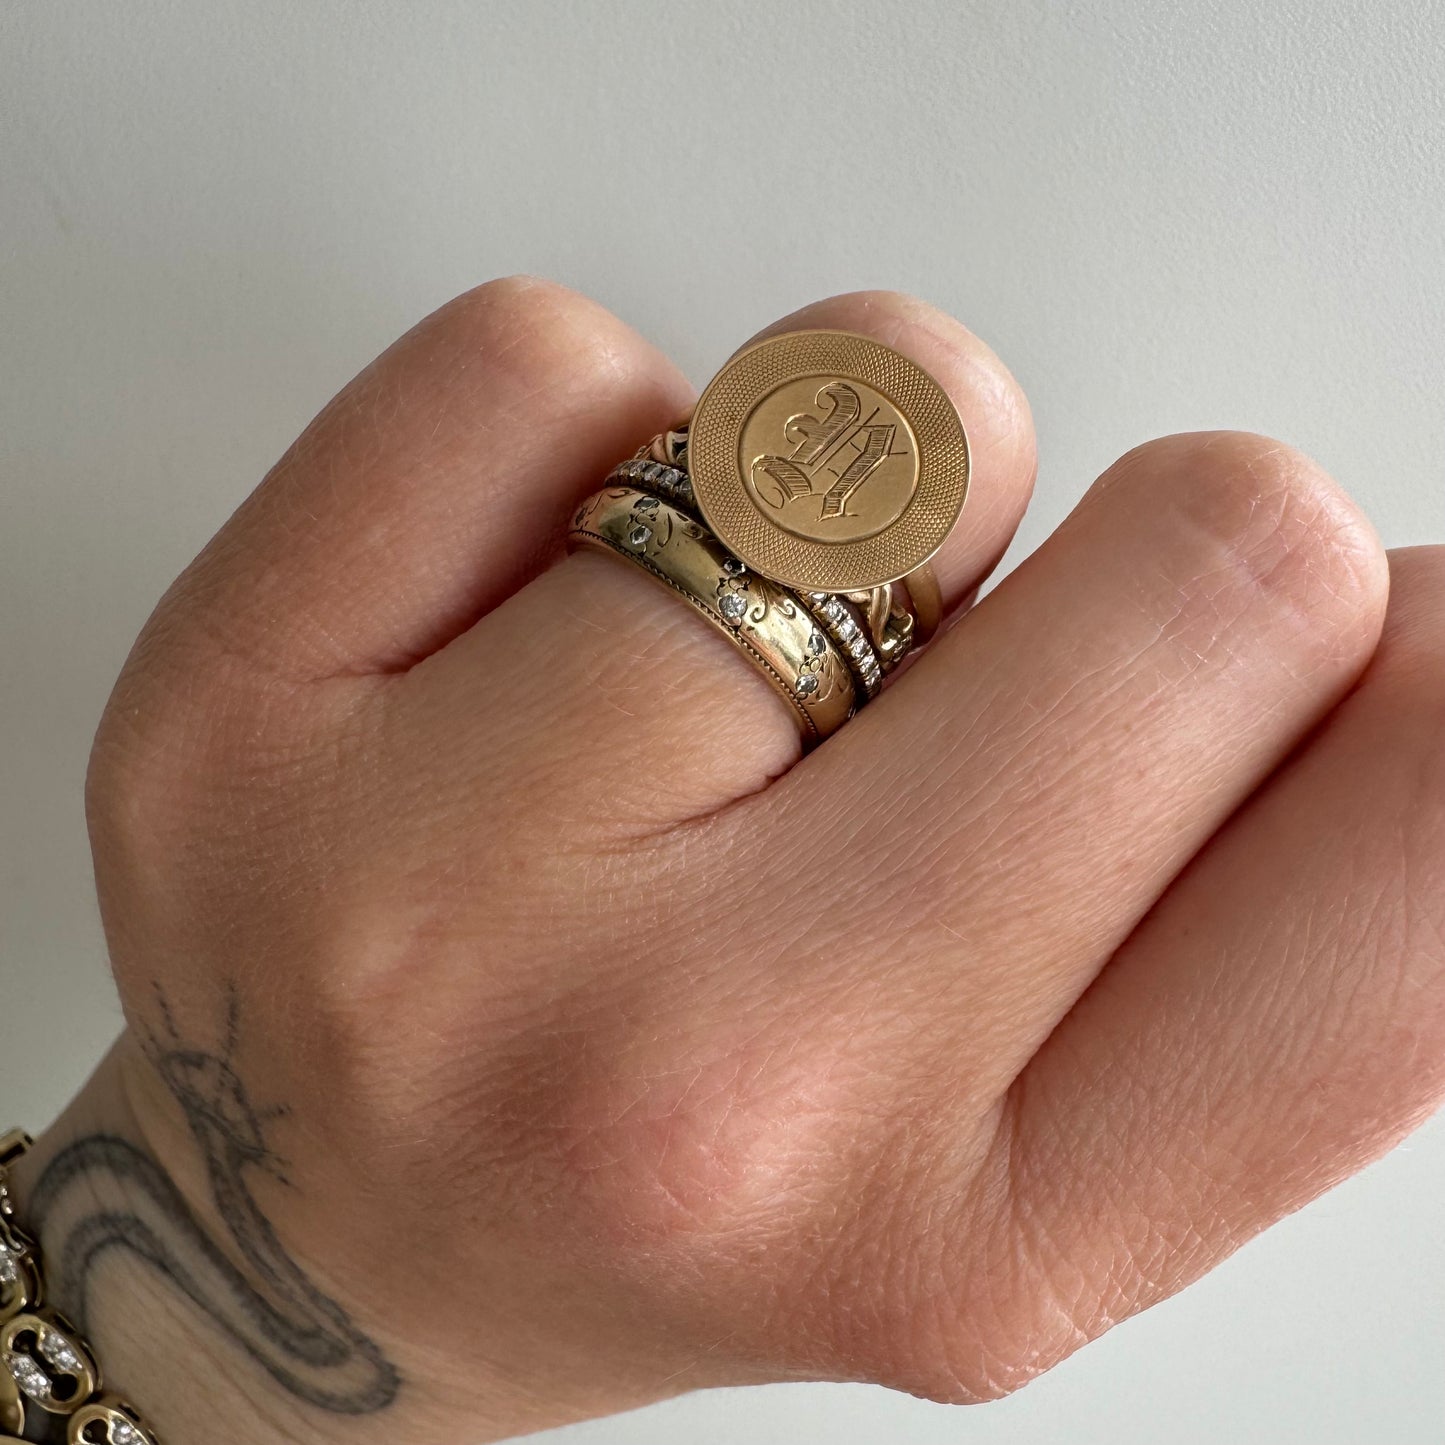 reimagined V I N T A G E // D's button / 10k round button conversion ring / size 6.5